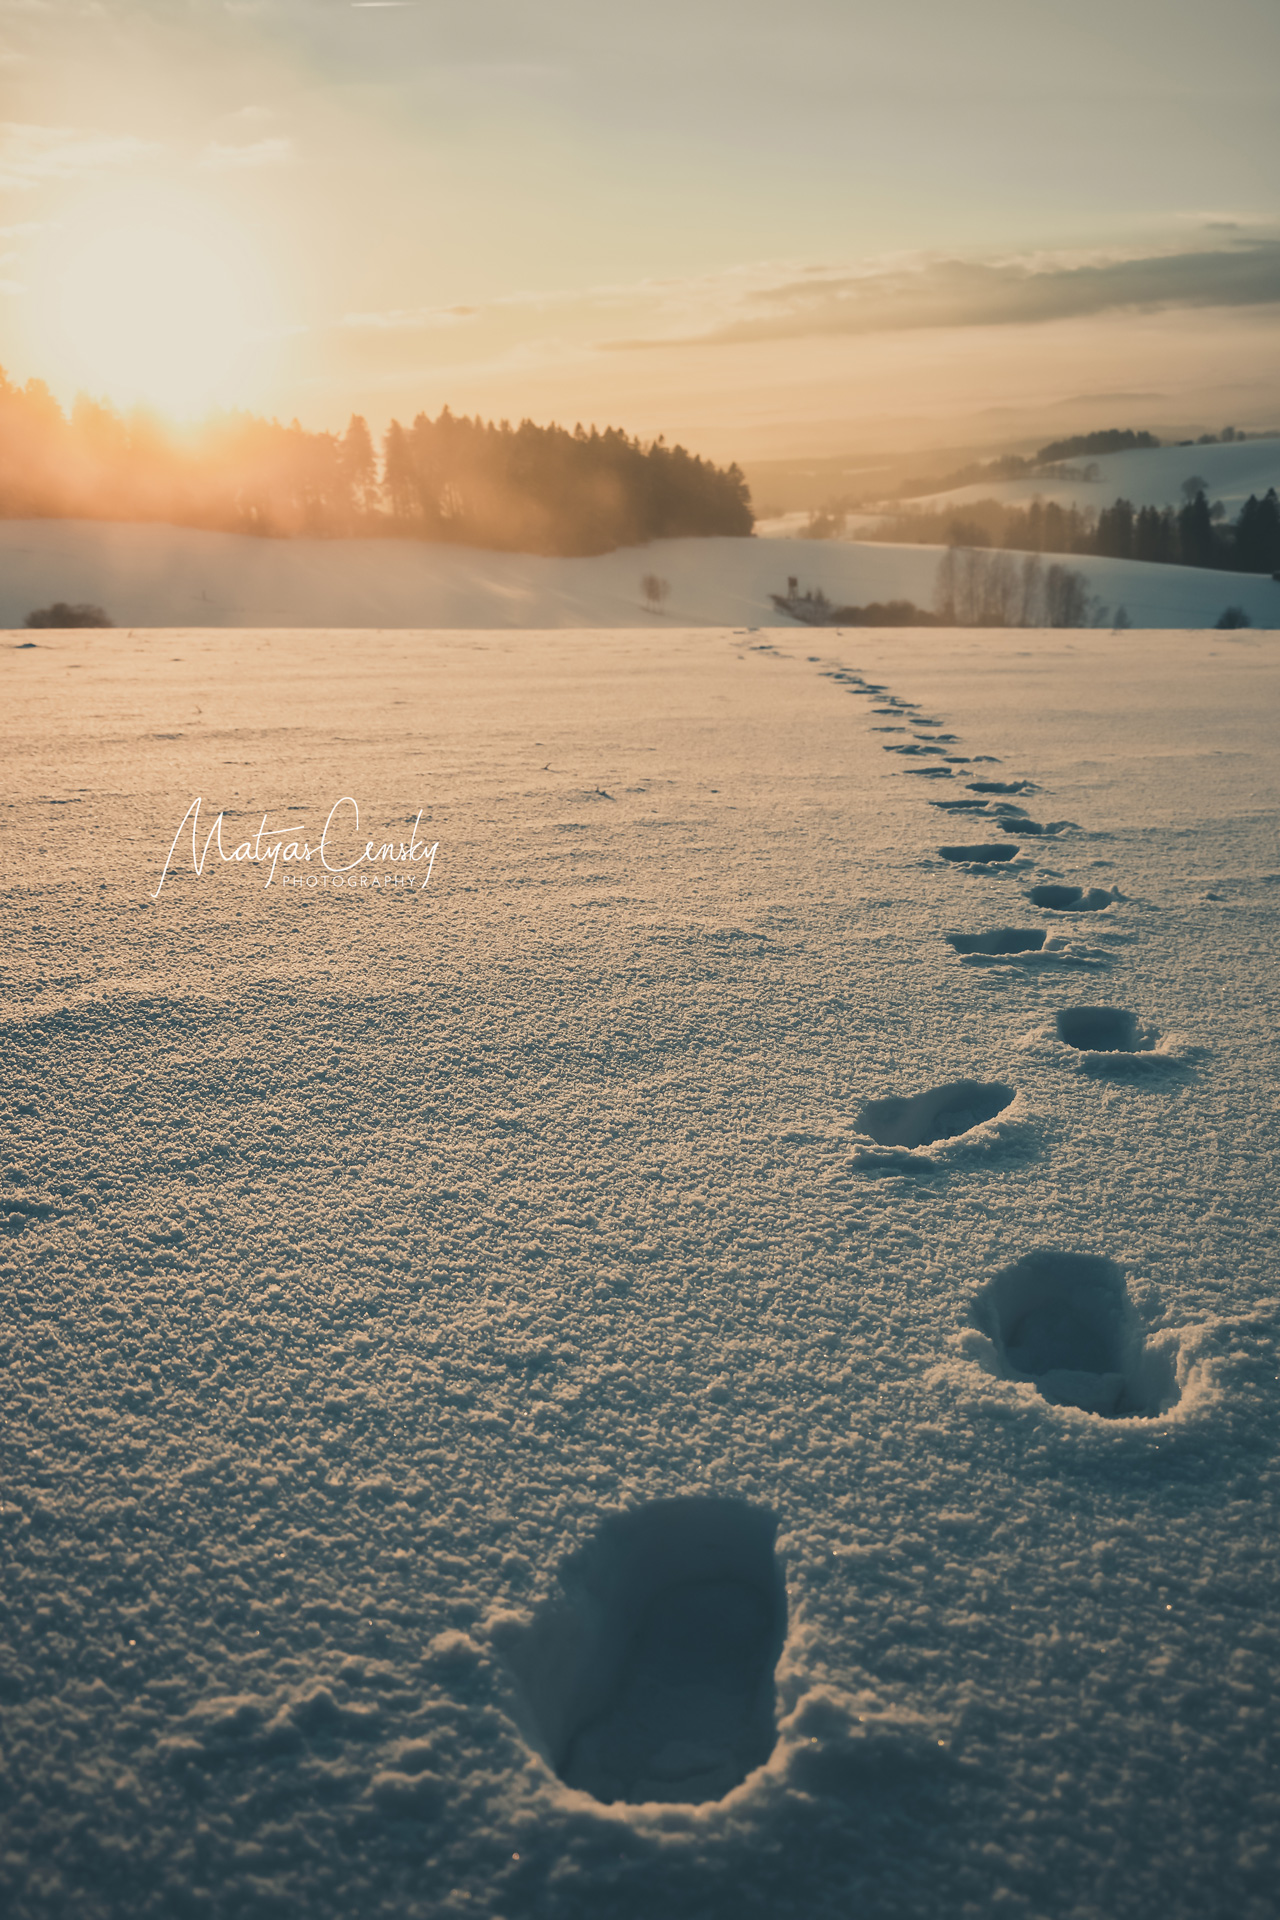 Photo of footprins in snow during sun set in the background up in the mountains in Czech republic.